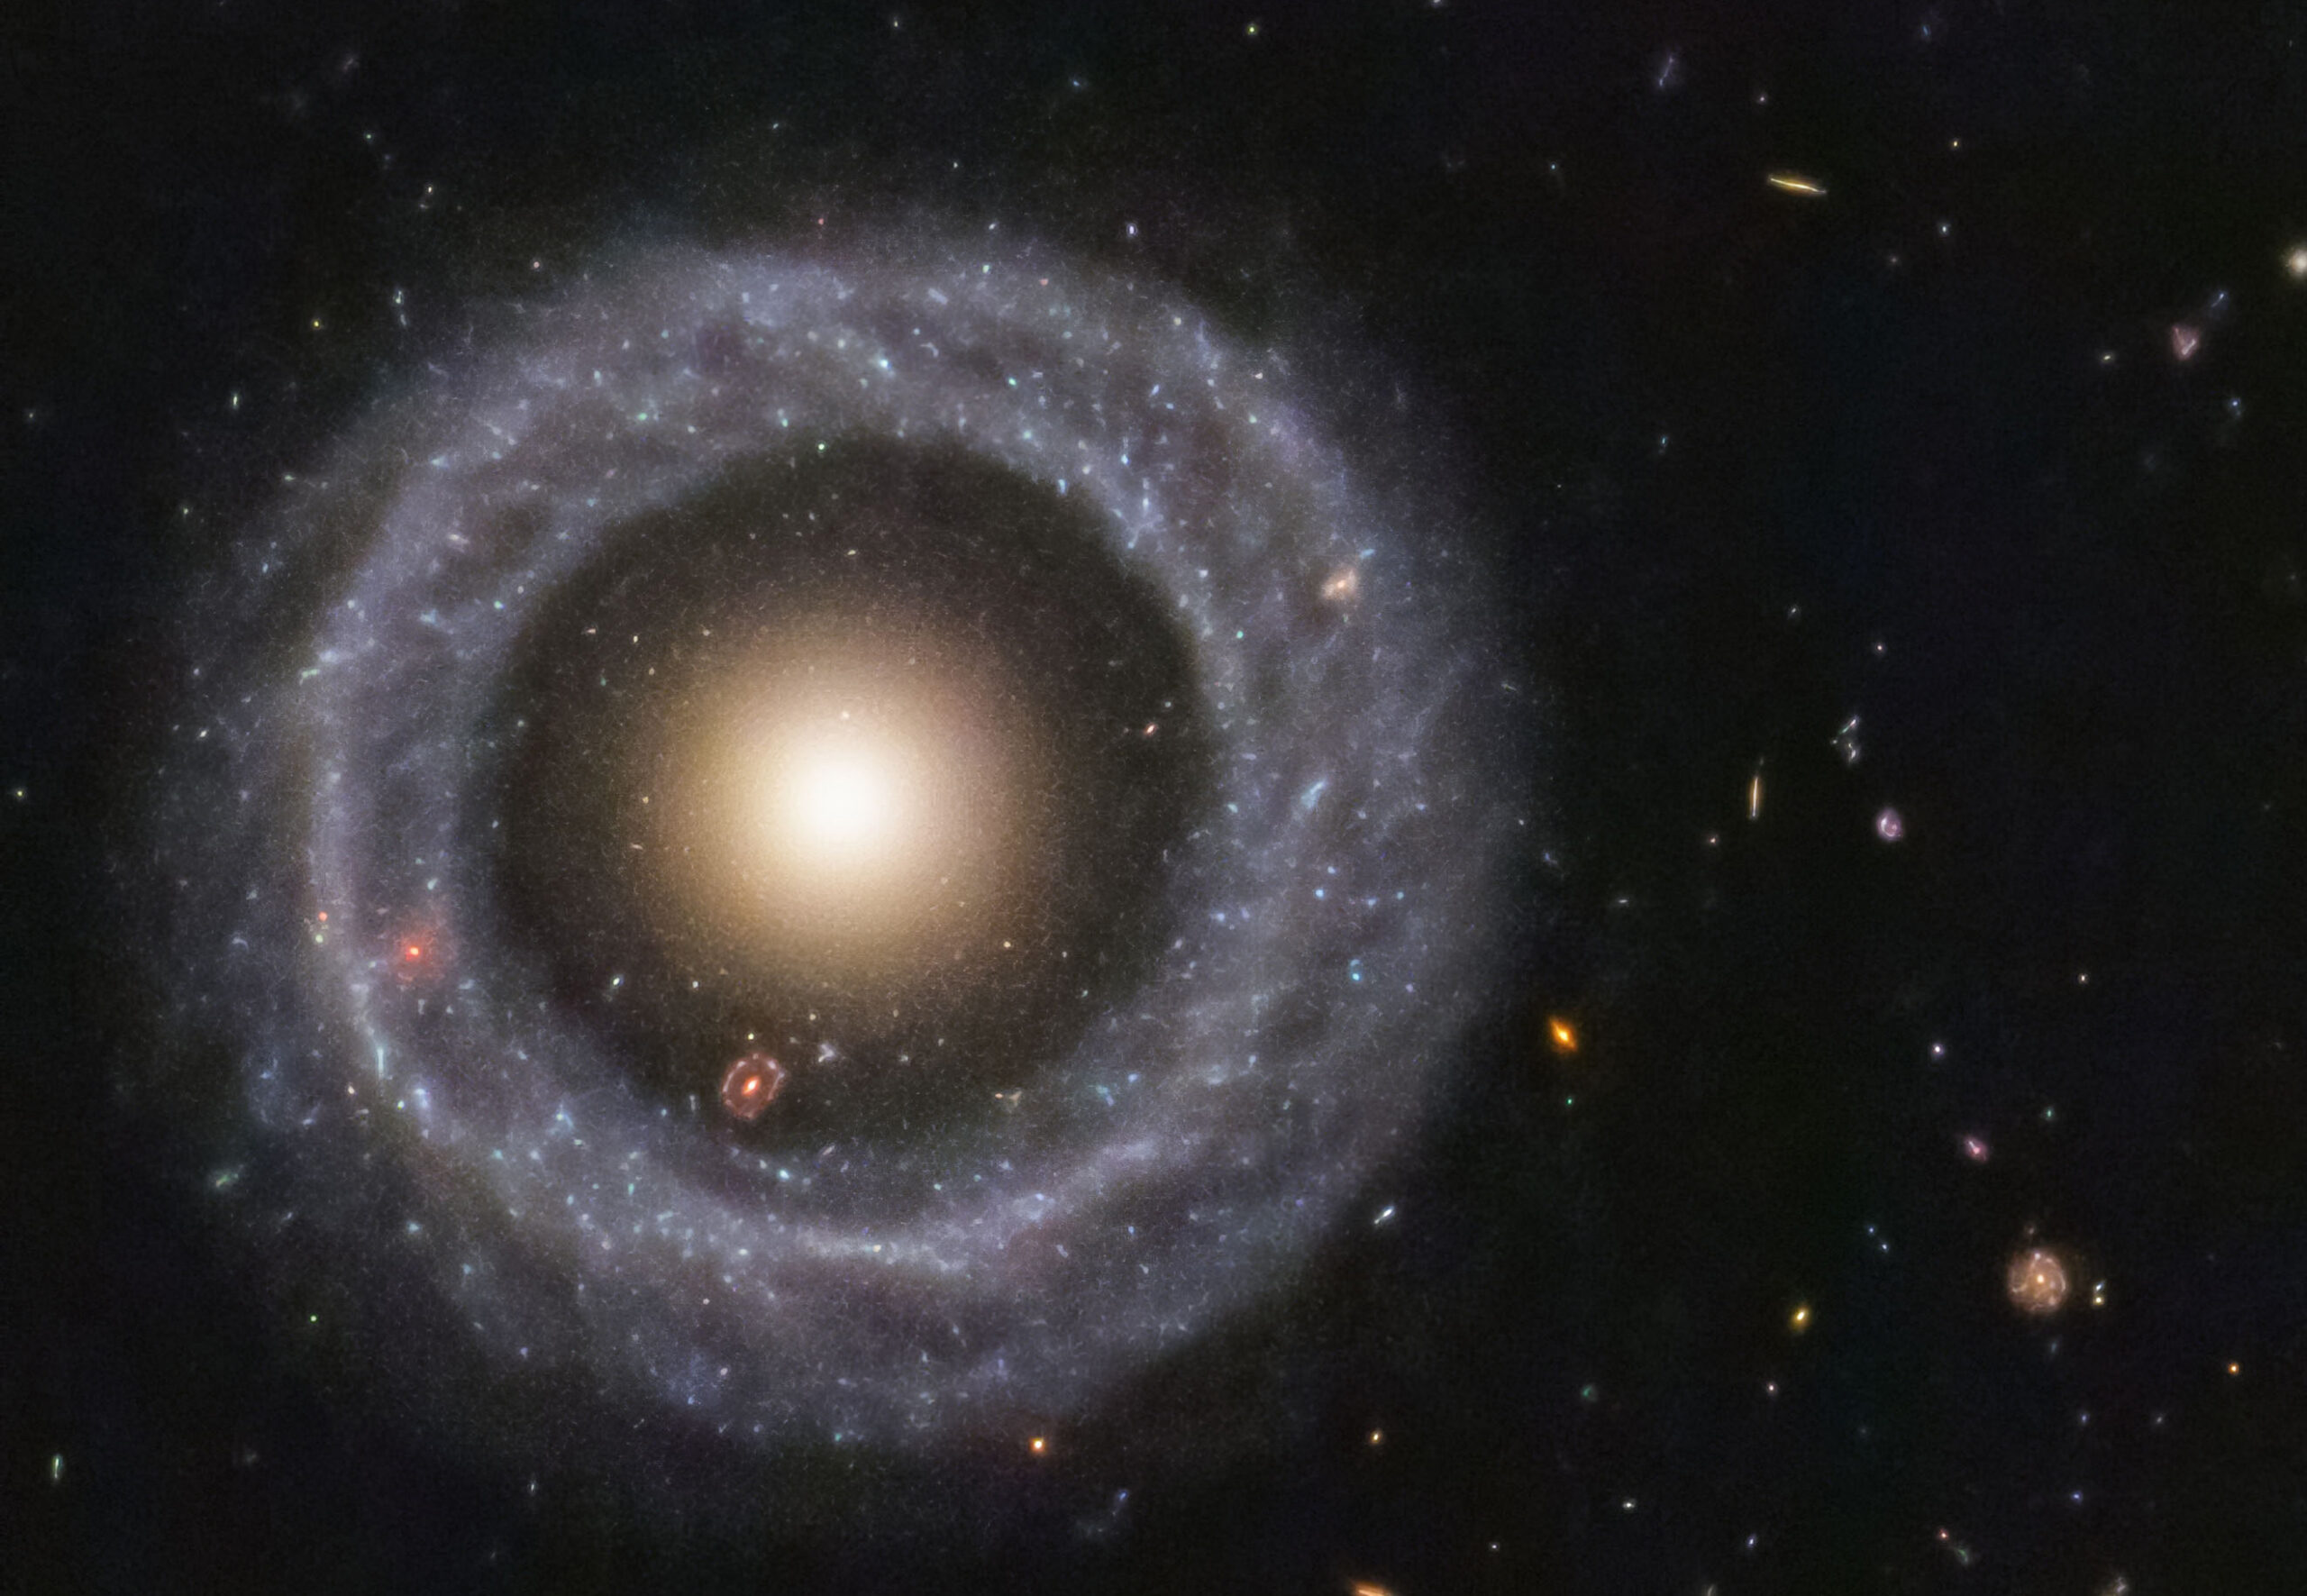 The typical galaxy is located 600 million light-years from Earth and looks like this